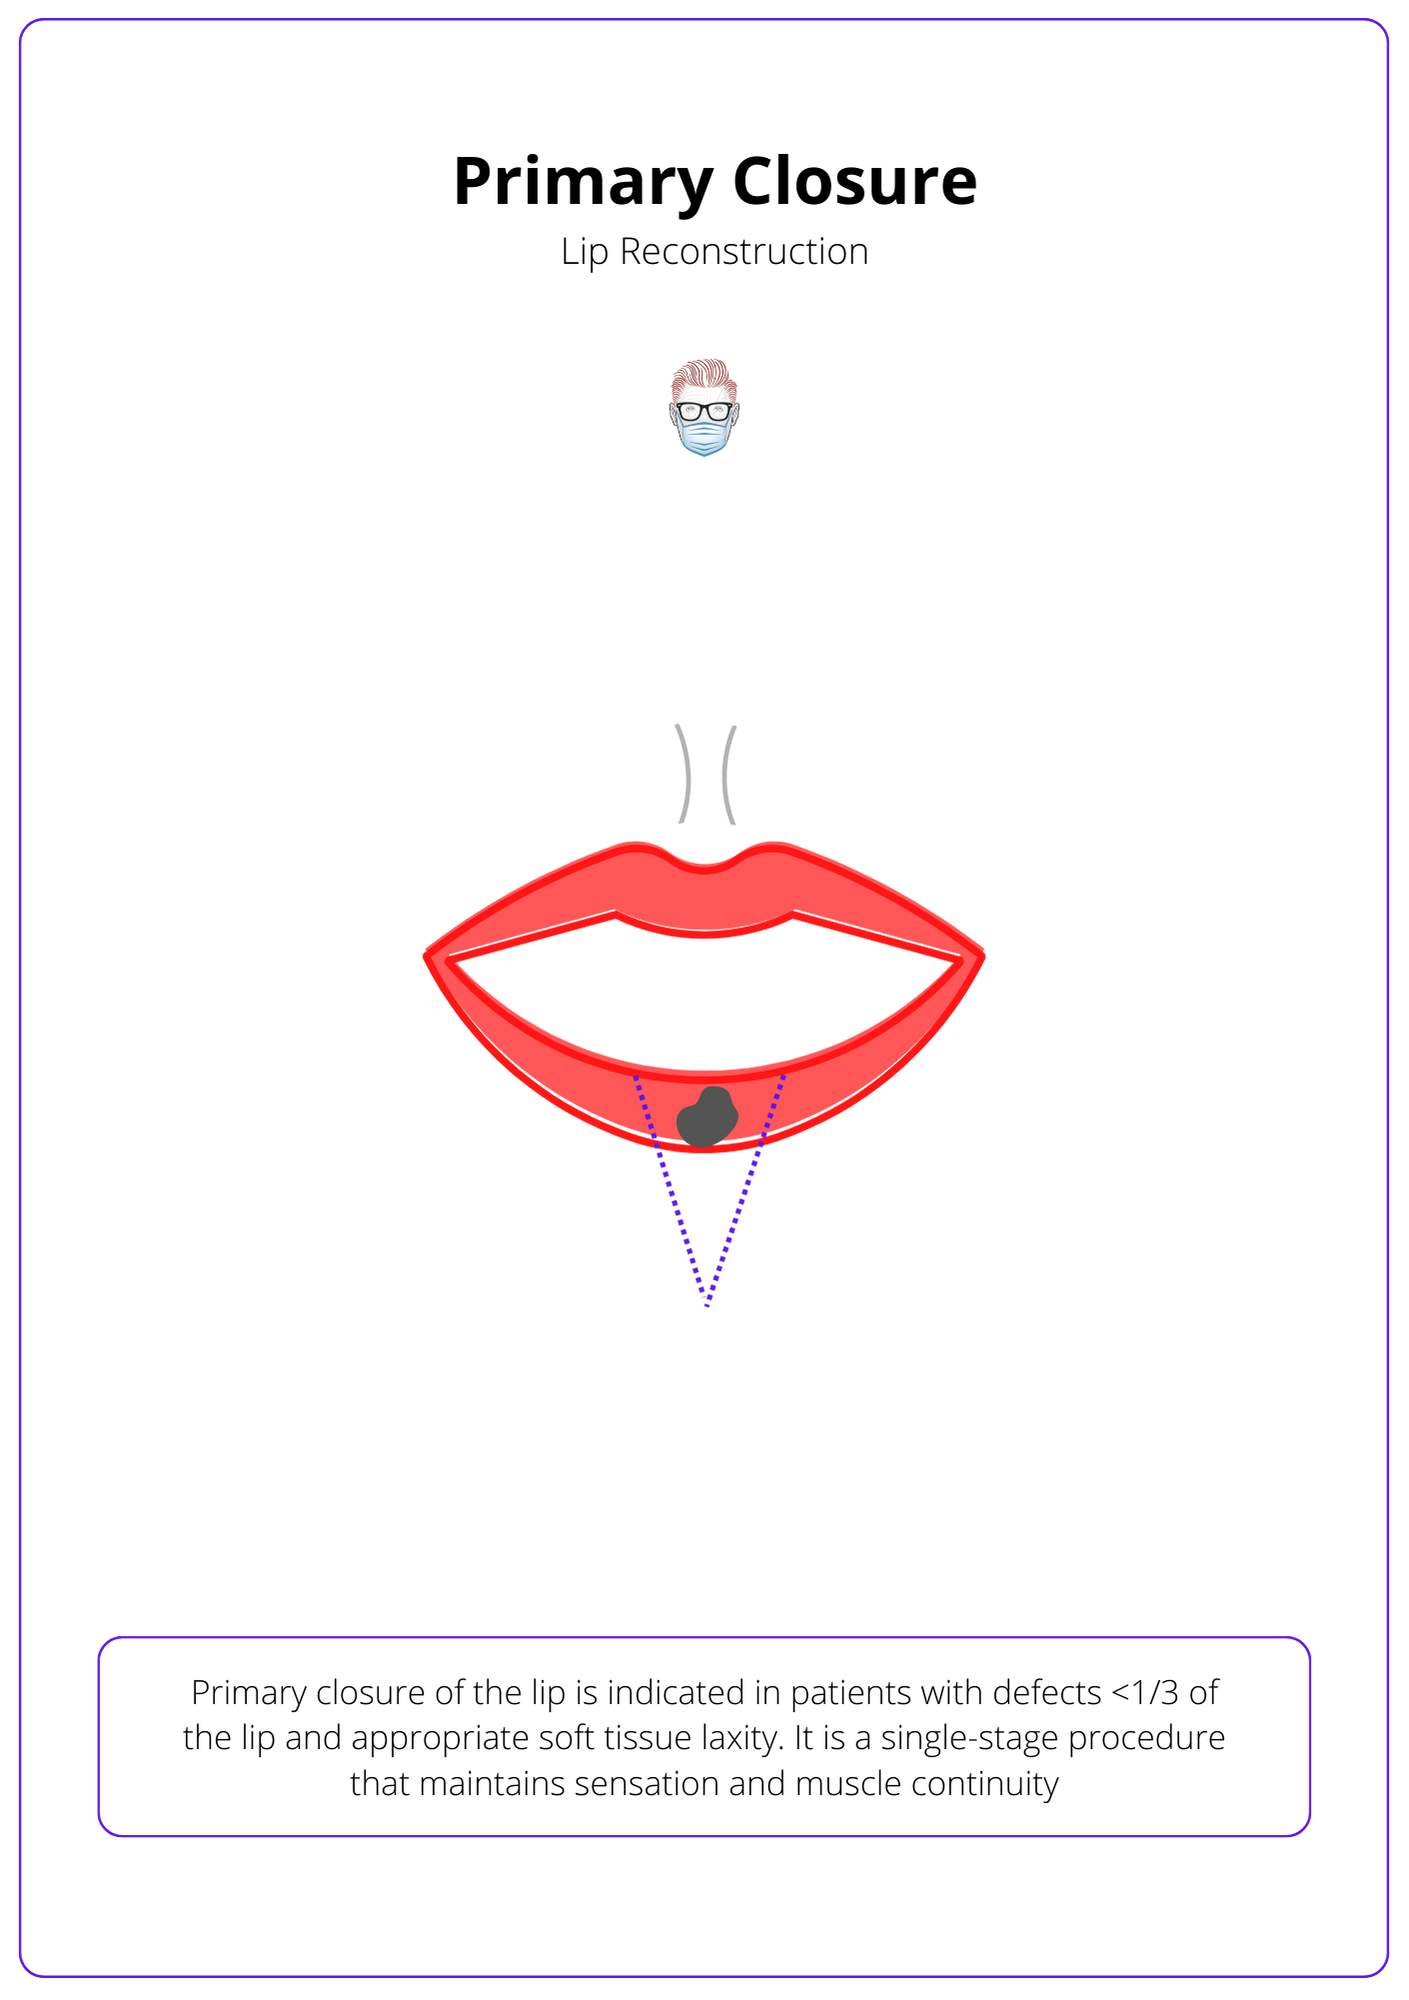 A labelled drawing of a red lip with a cancer. The lip is reconstruced with a blue dotted line to show a primary closure reconstruction